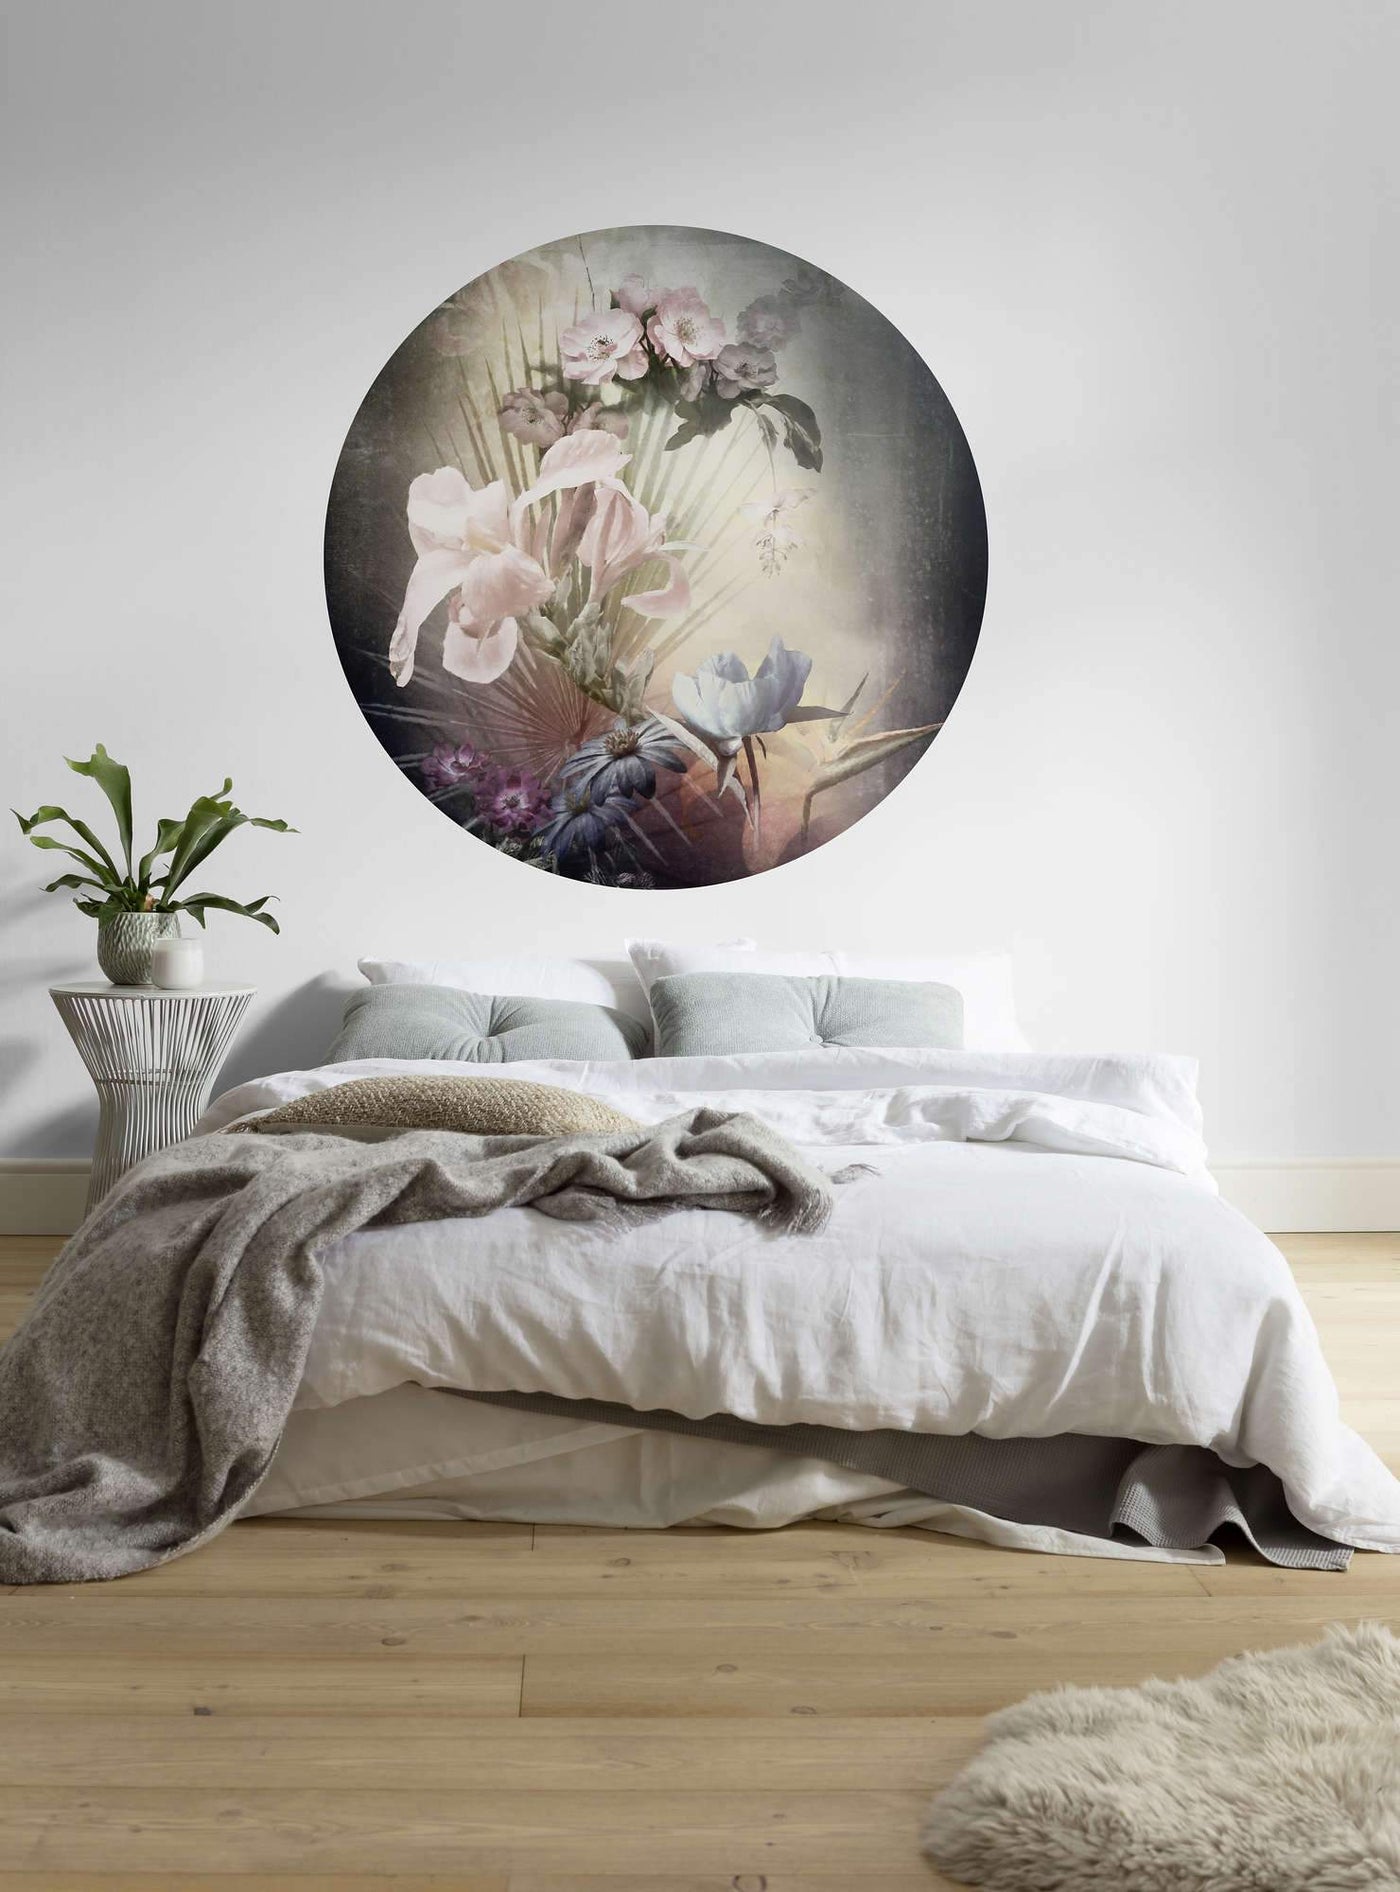 Mystical Florals Circle Wall Art (Self-Adhesive)-Wall Decor-ABSTRACT WALLPAPERS, ART WALLPAPER, CIRCLE WALL ART, ECO MURALS, NATURE WALL ART, PATTERN WALLPAPERS, SUSTAINABLE DECOR-Forest Homes-Nature inspired decor-Nature decor